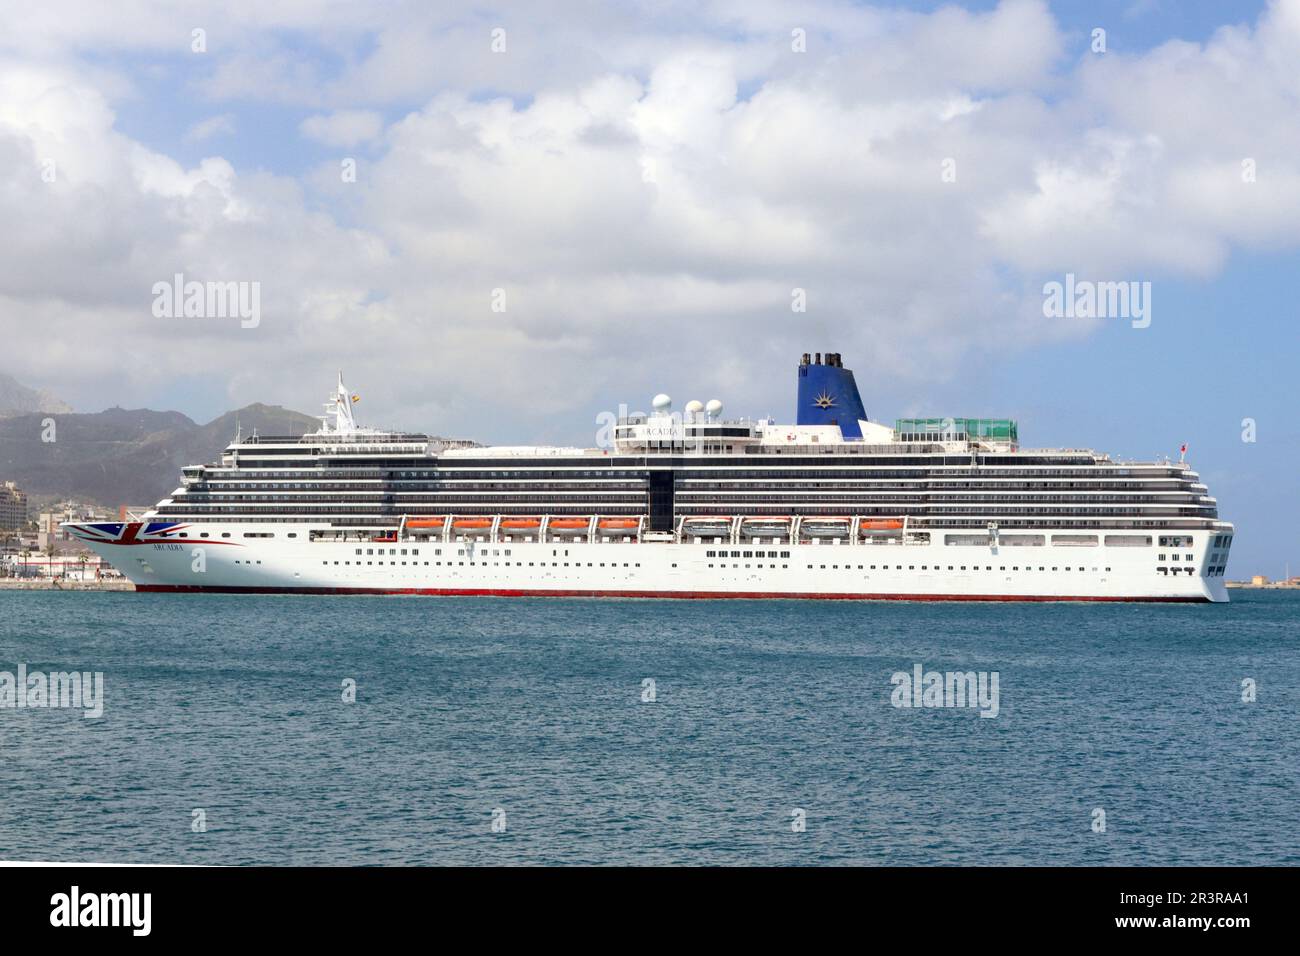 Arcadia, P&O cruises Vista class cruise liner moored at Ceuta, a Spanish autonomous city on the north coast of Africa, bordered by Morocco, April 2023. Stock Photo